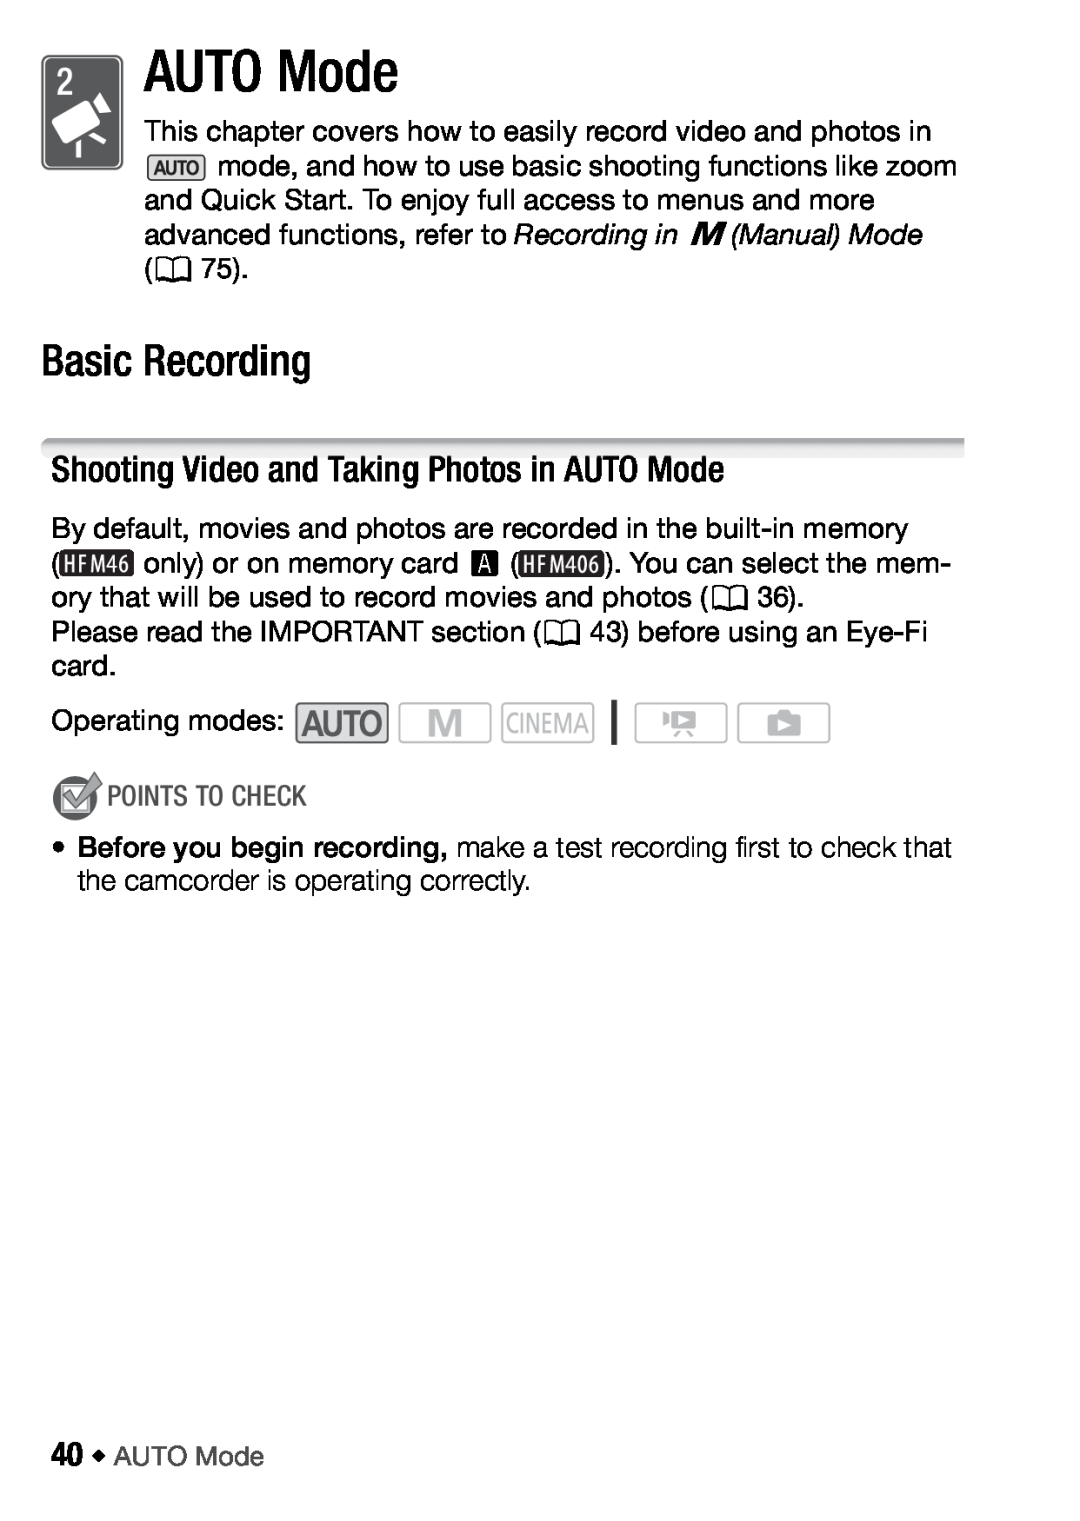 Canon HFM406, HFM46 instruction manual Basic Recording, Shooting Video and Taking Photos in AUTO Mode, Points To Check 